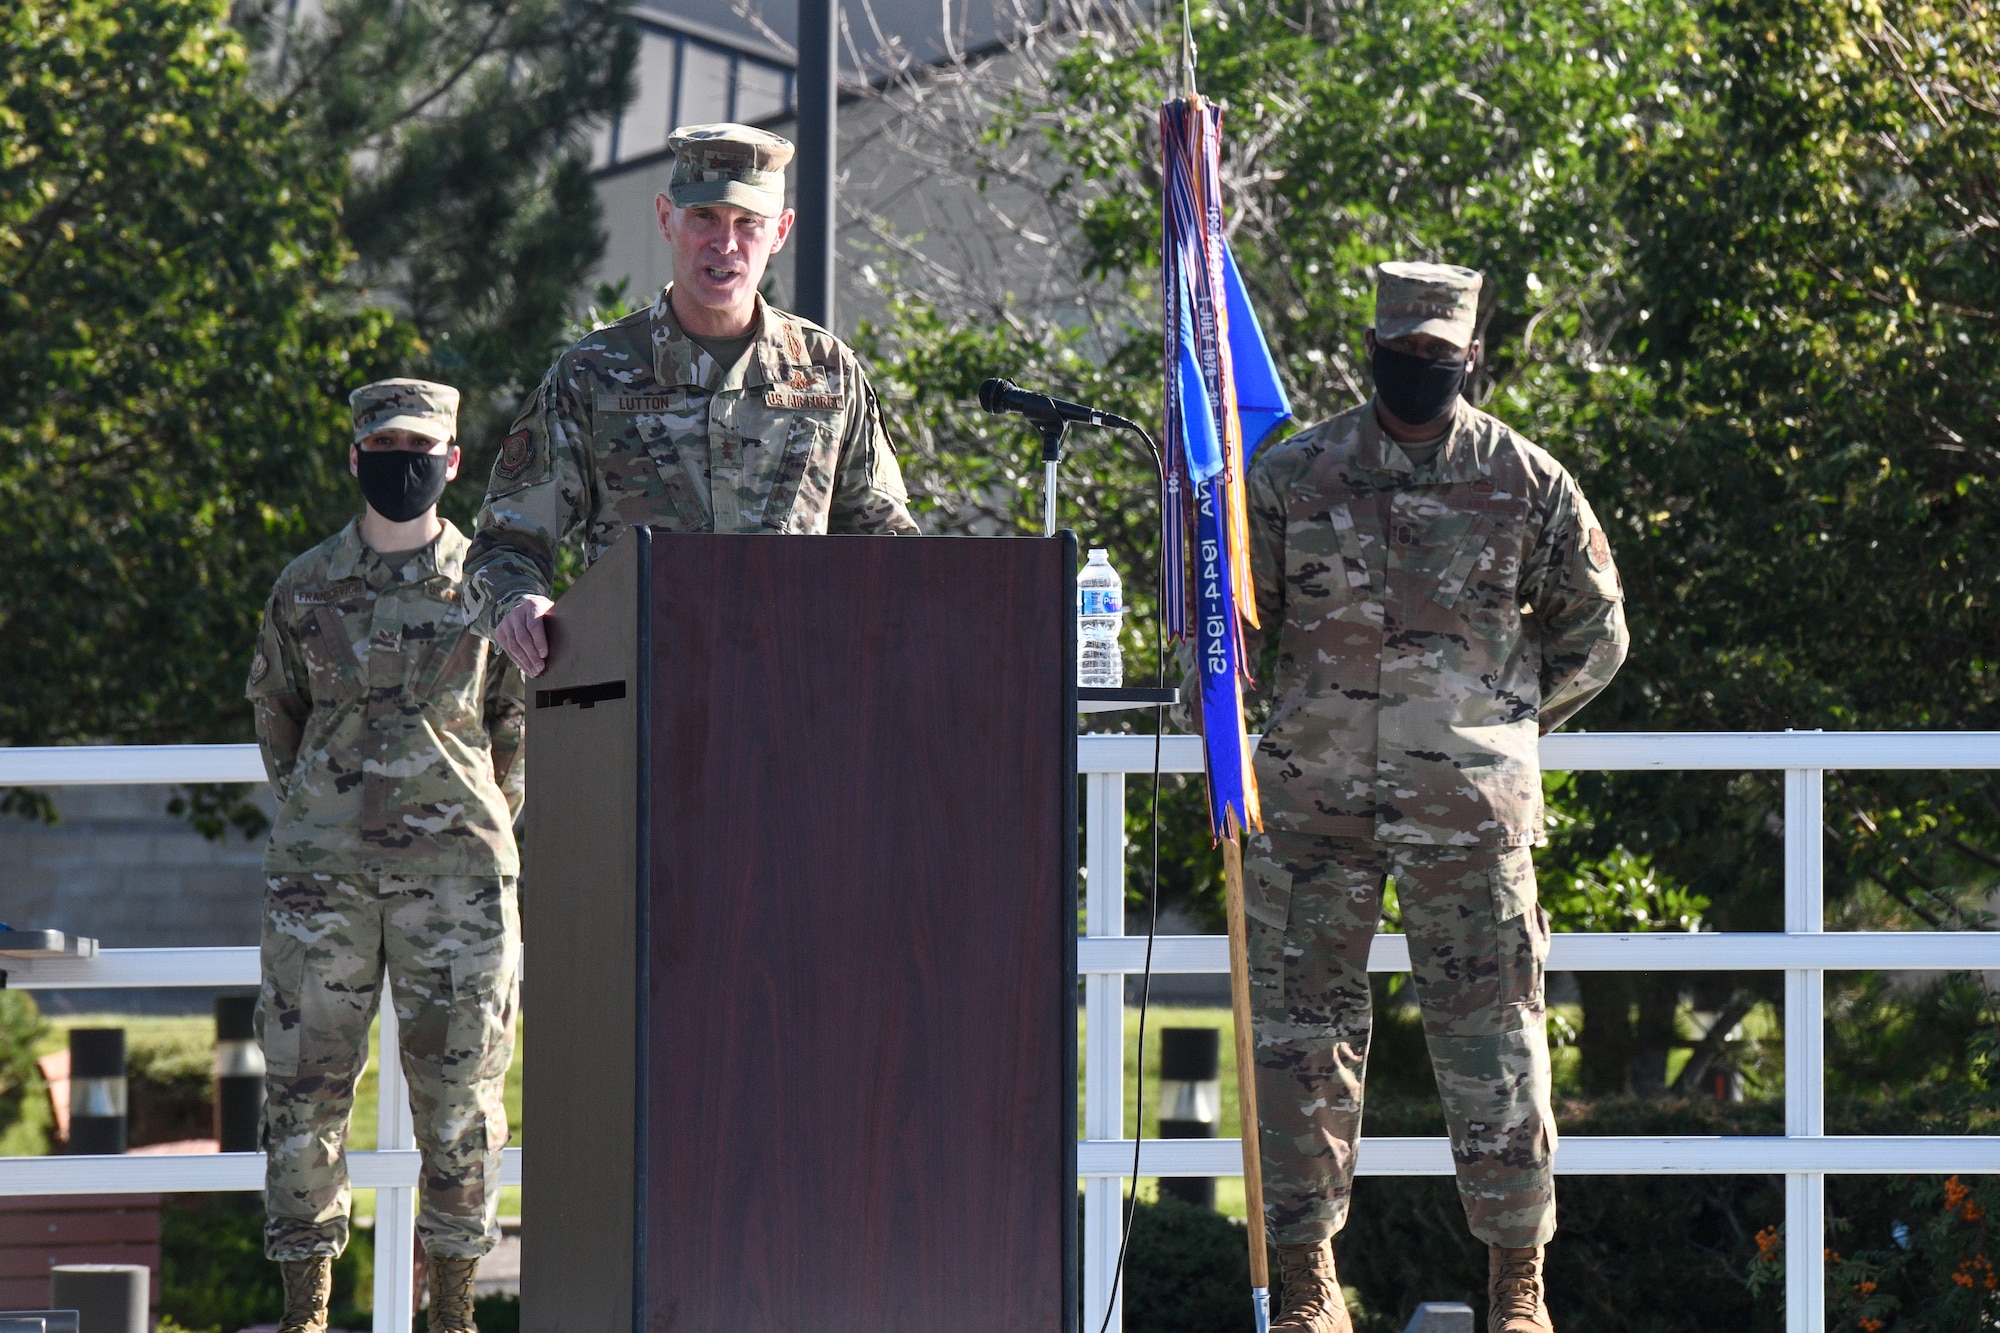 Maj. Gen. Michael Lutton, 20th Air Force commander, makes opening remarks during the 341st Missile Wing change of command ceremony Aug. 5, 2020, at Malmstrom Air Force Base, Mont.